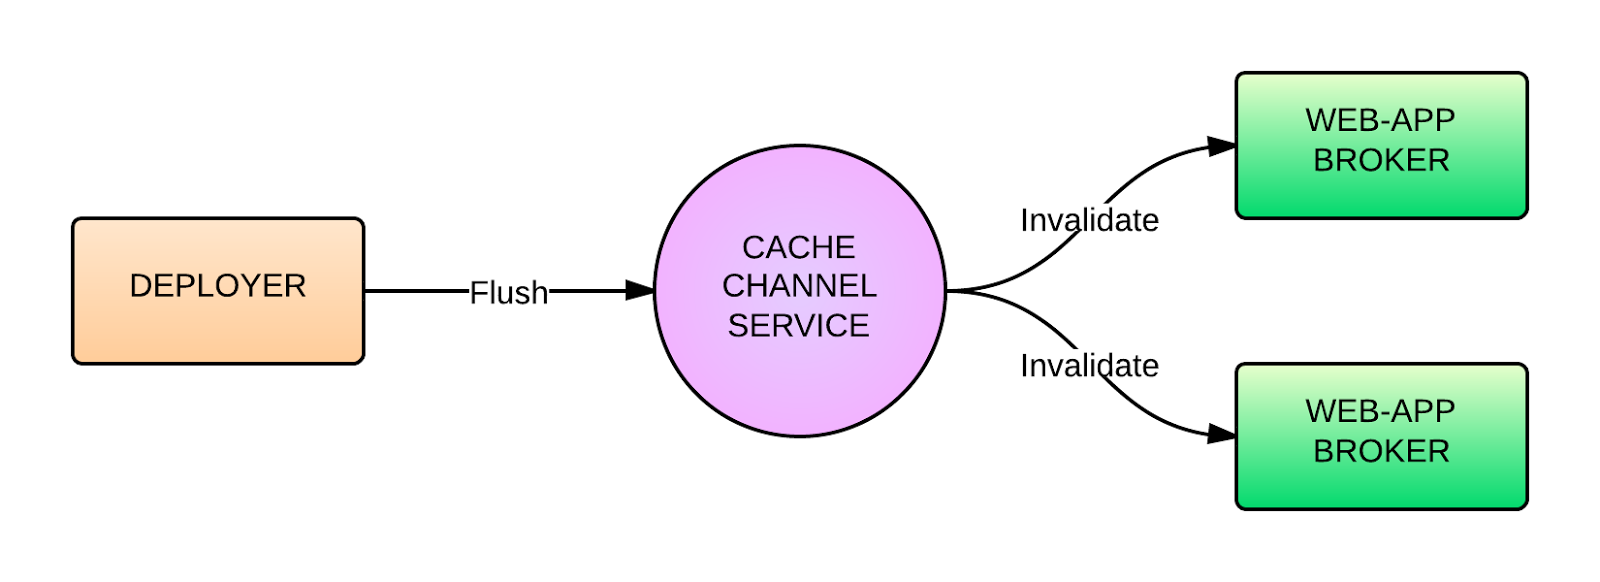 Diagram showing the deployer sending 'flush' messages to the Cache Channel Service, which then relays the messages as 'invalidates' to all connected Web-Applications